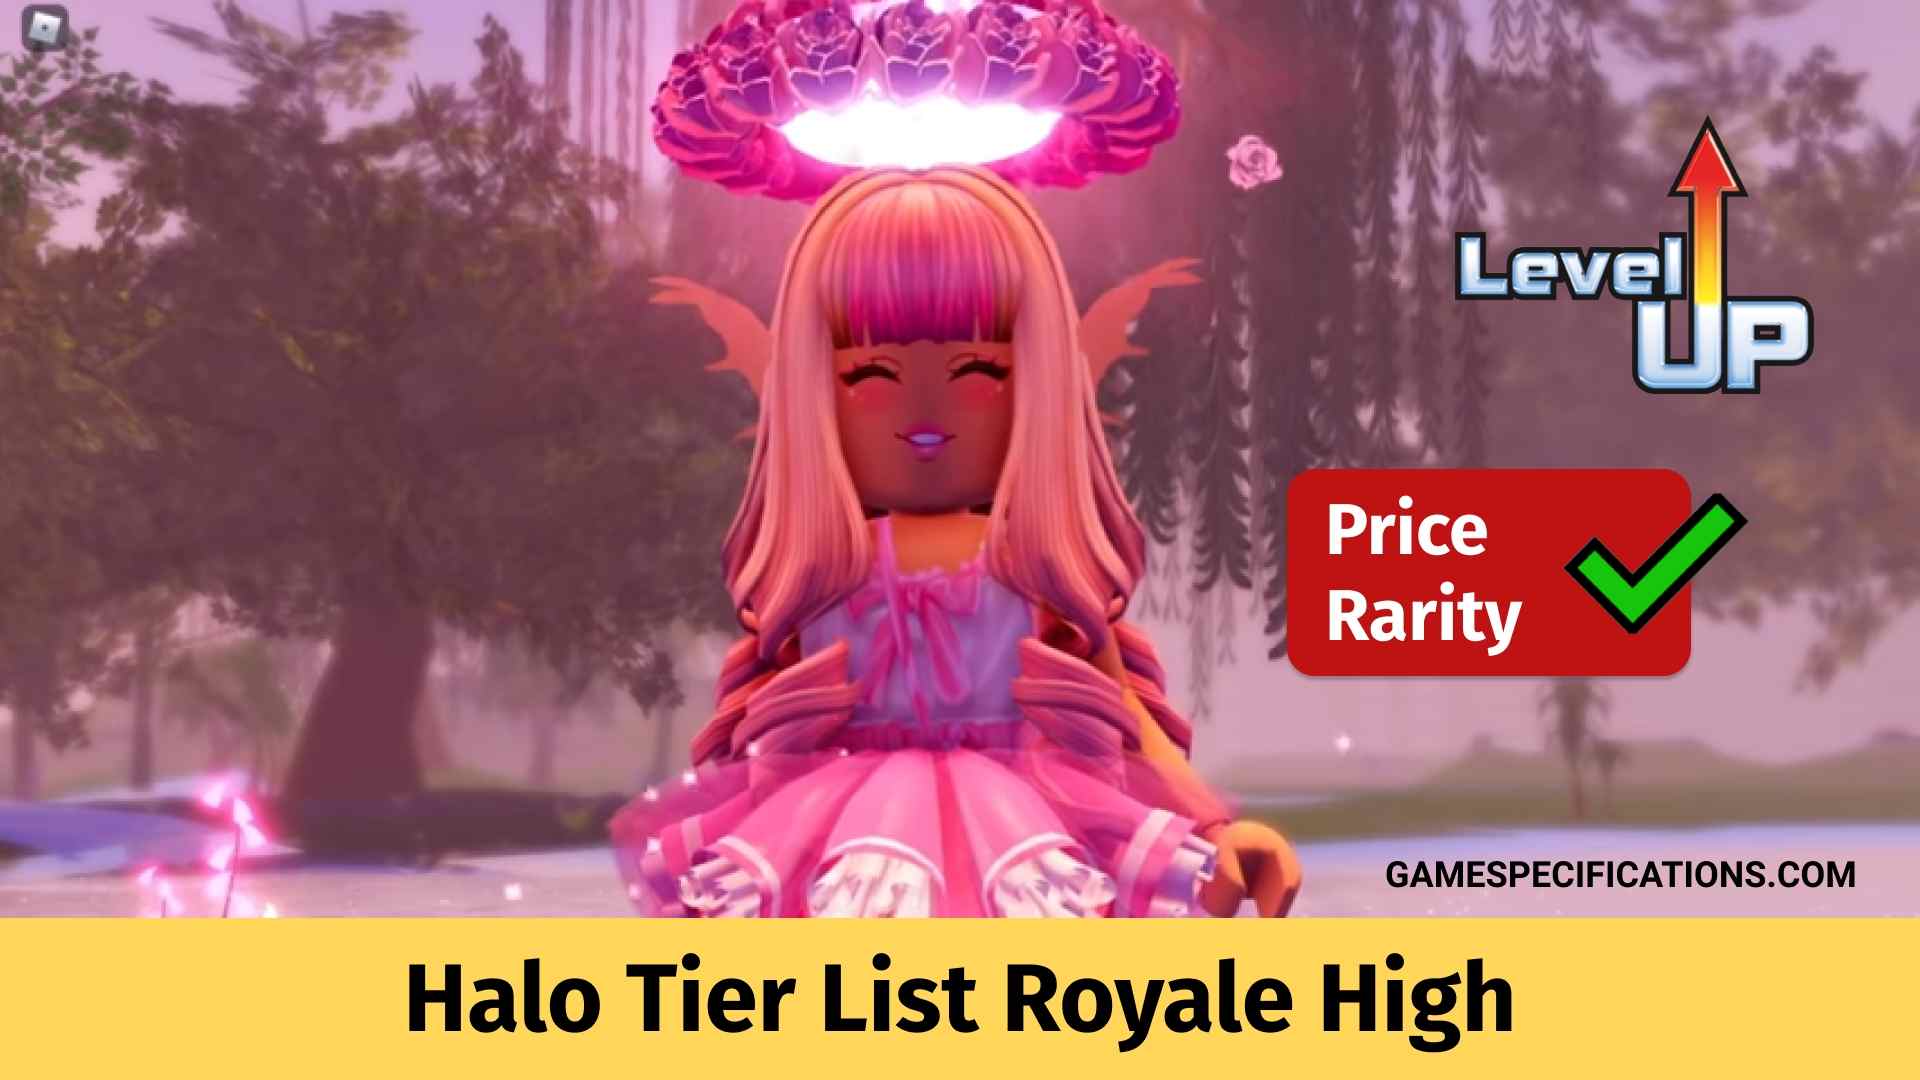 Top Halo Tier List Royale High Based On Rarity 2021 Game Specifications - roblox royale high spring halo 2020